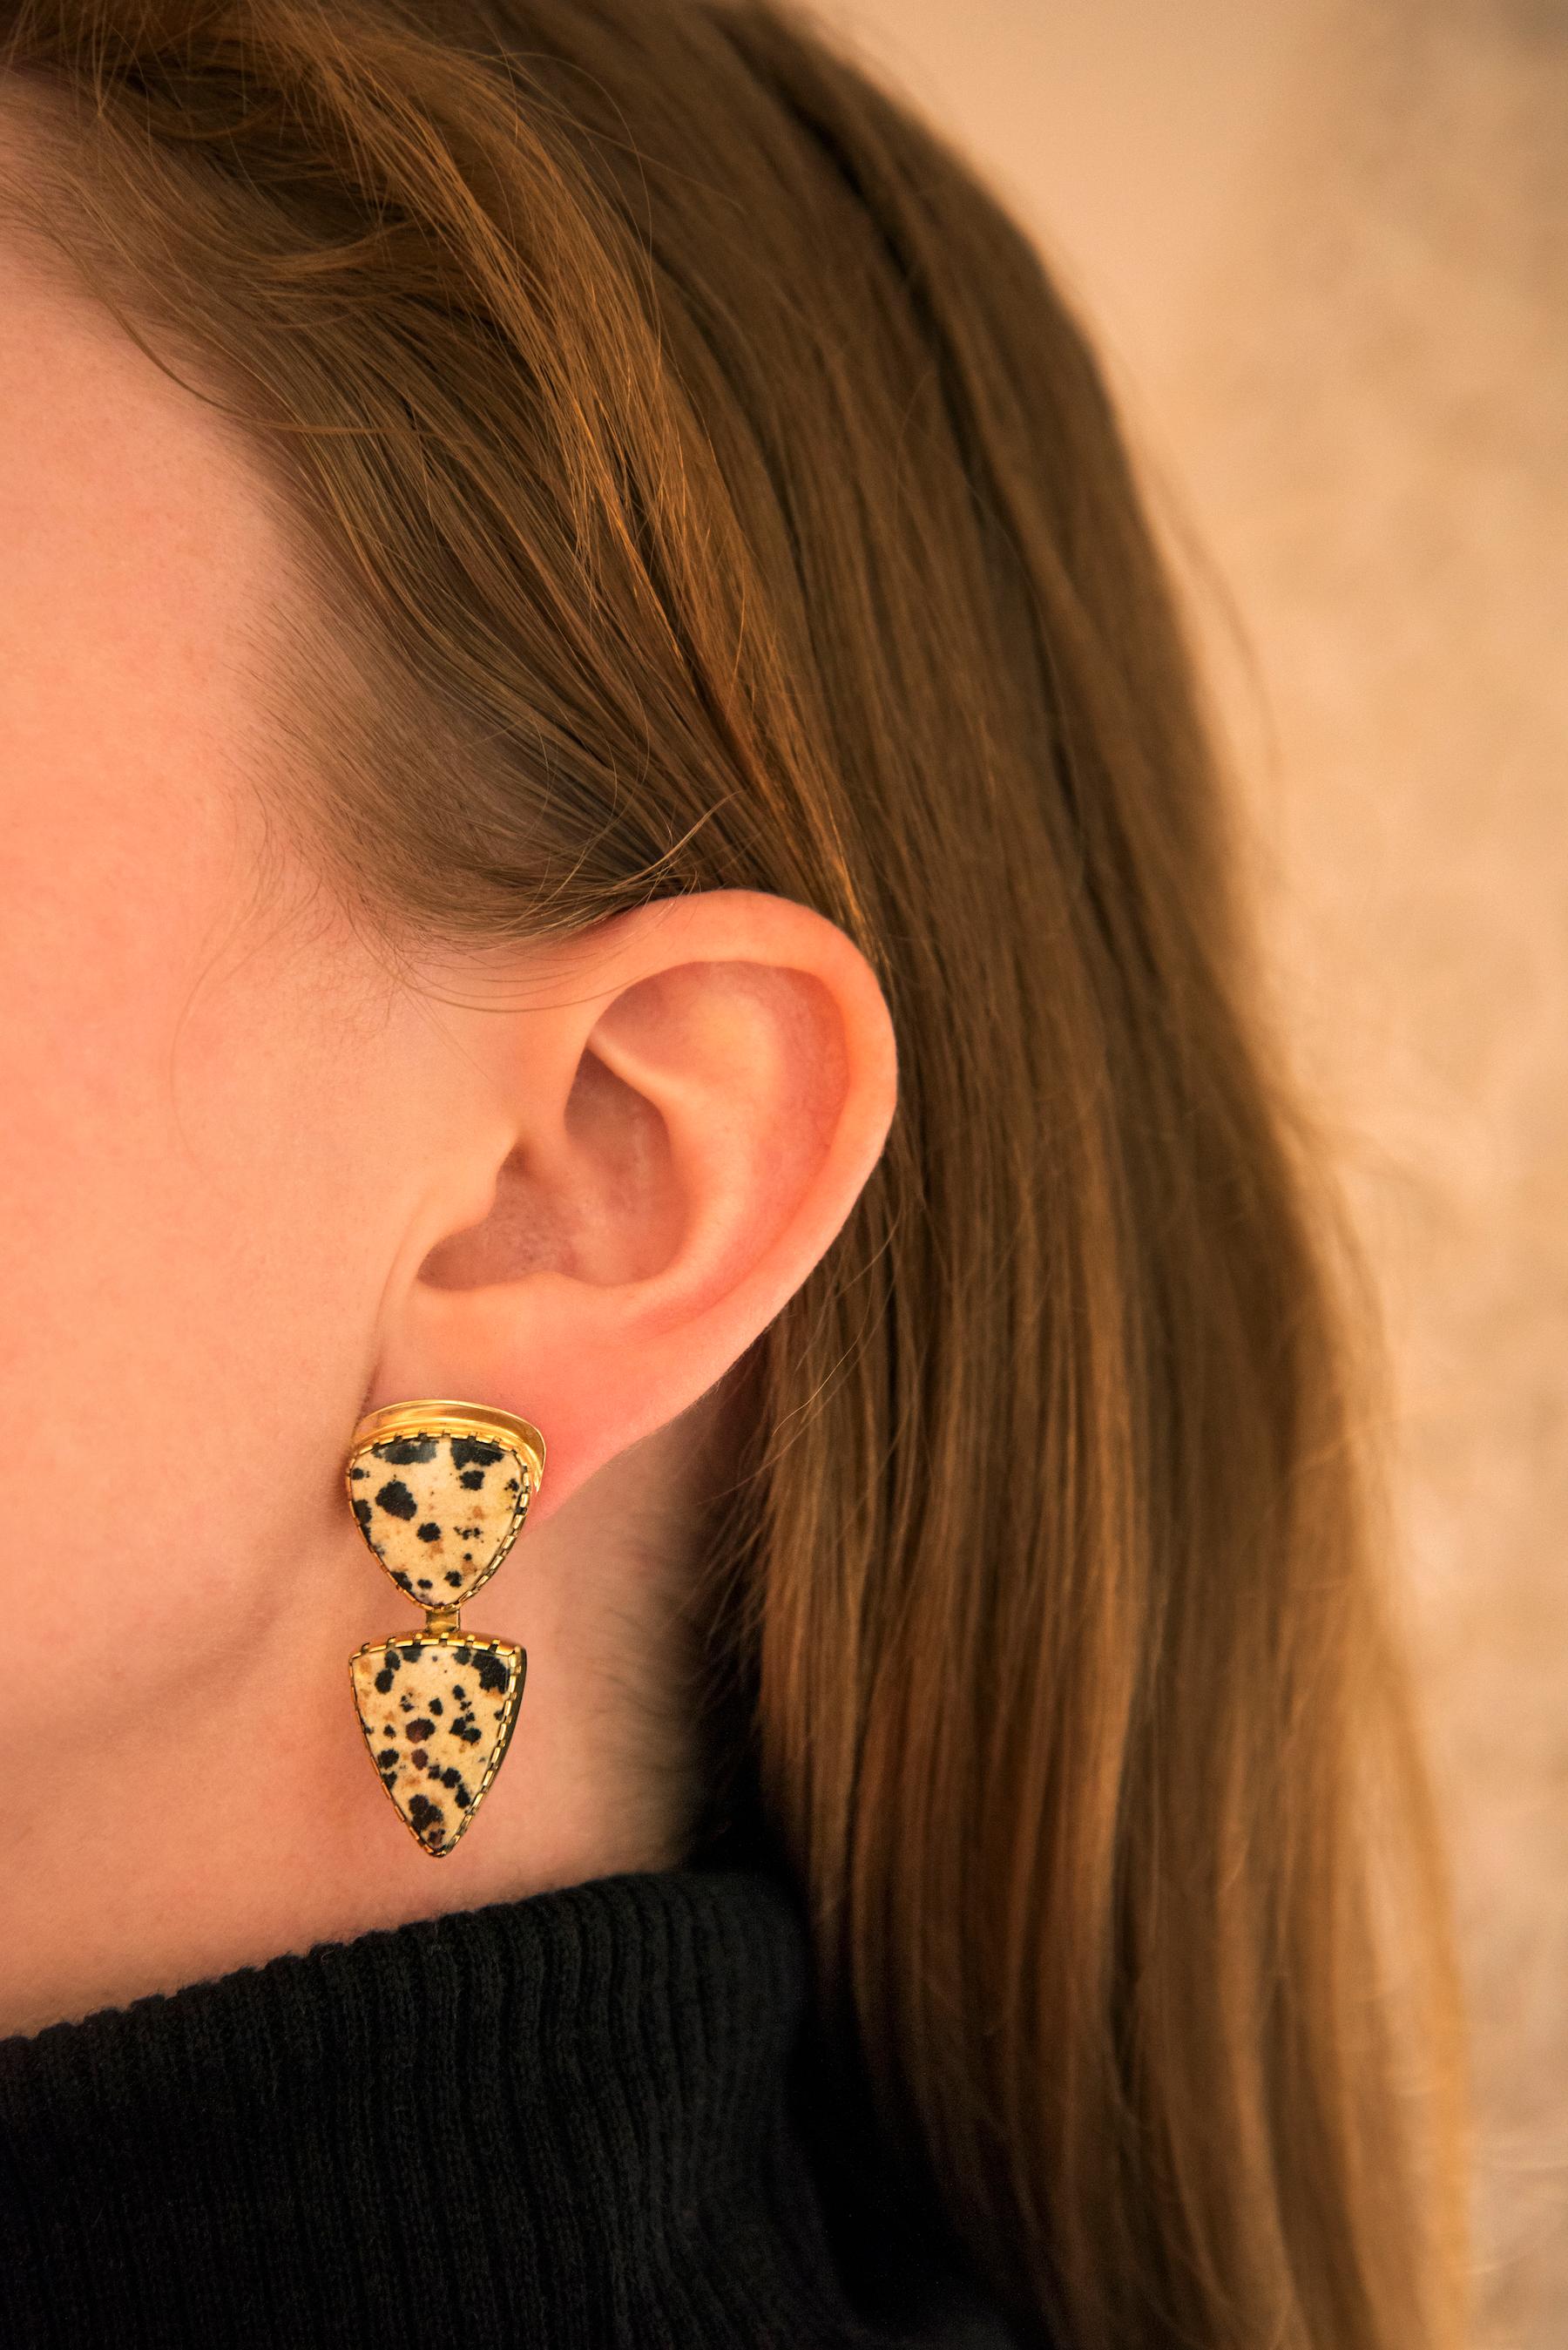 A pair of dalmatian jasper and 18 karat yellow gold earrings, by Gail Bird, Laguna Pueblo and Yazzie Johnson, Navajo, United States. The earrings are stamped with maker's mark (conjoined G and Y) and 18K.

These unique earrings are an excellent